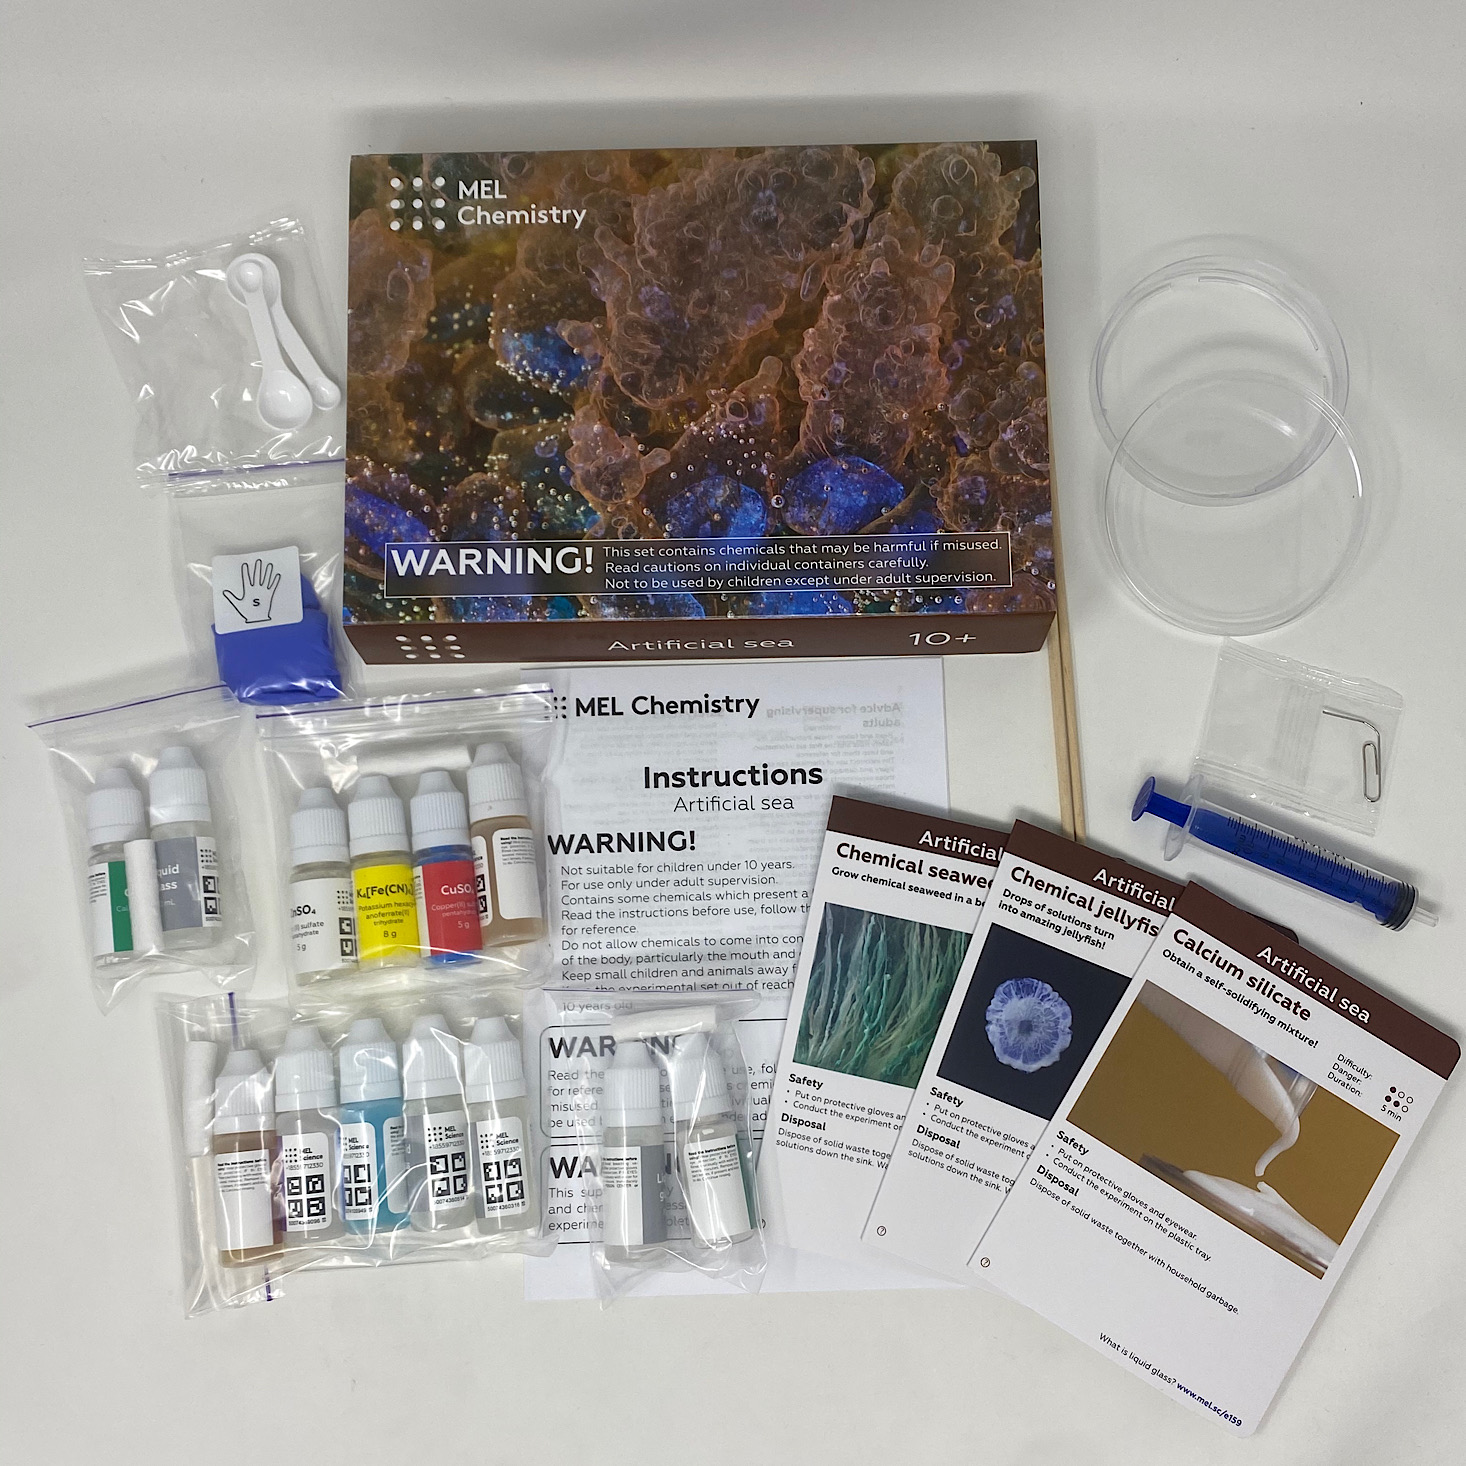 MEL Chemistry Subscription Review + Coupon – “Artificial Sea”